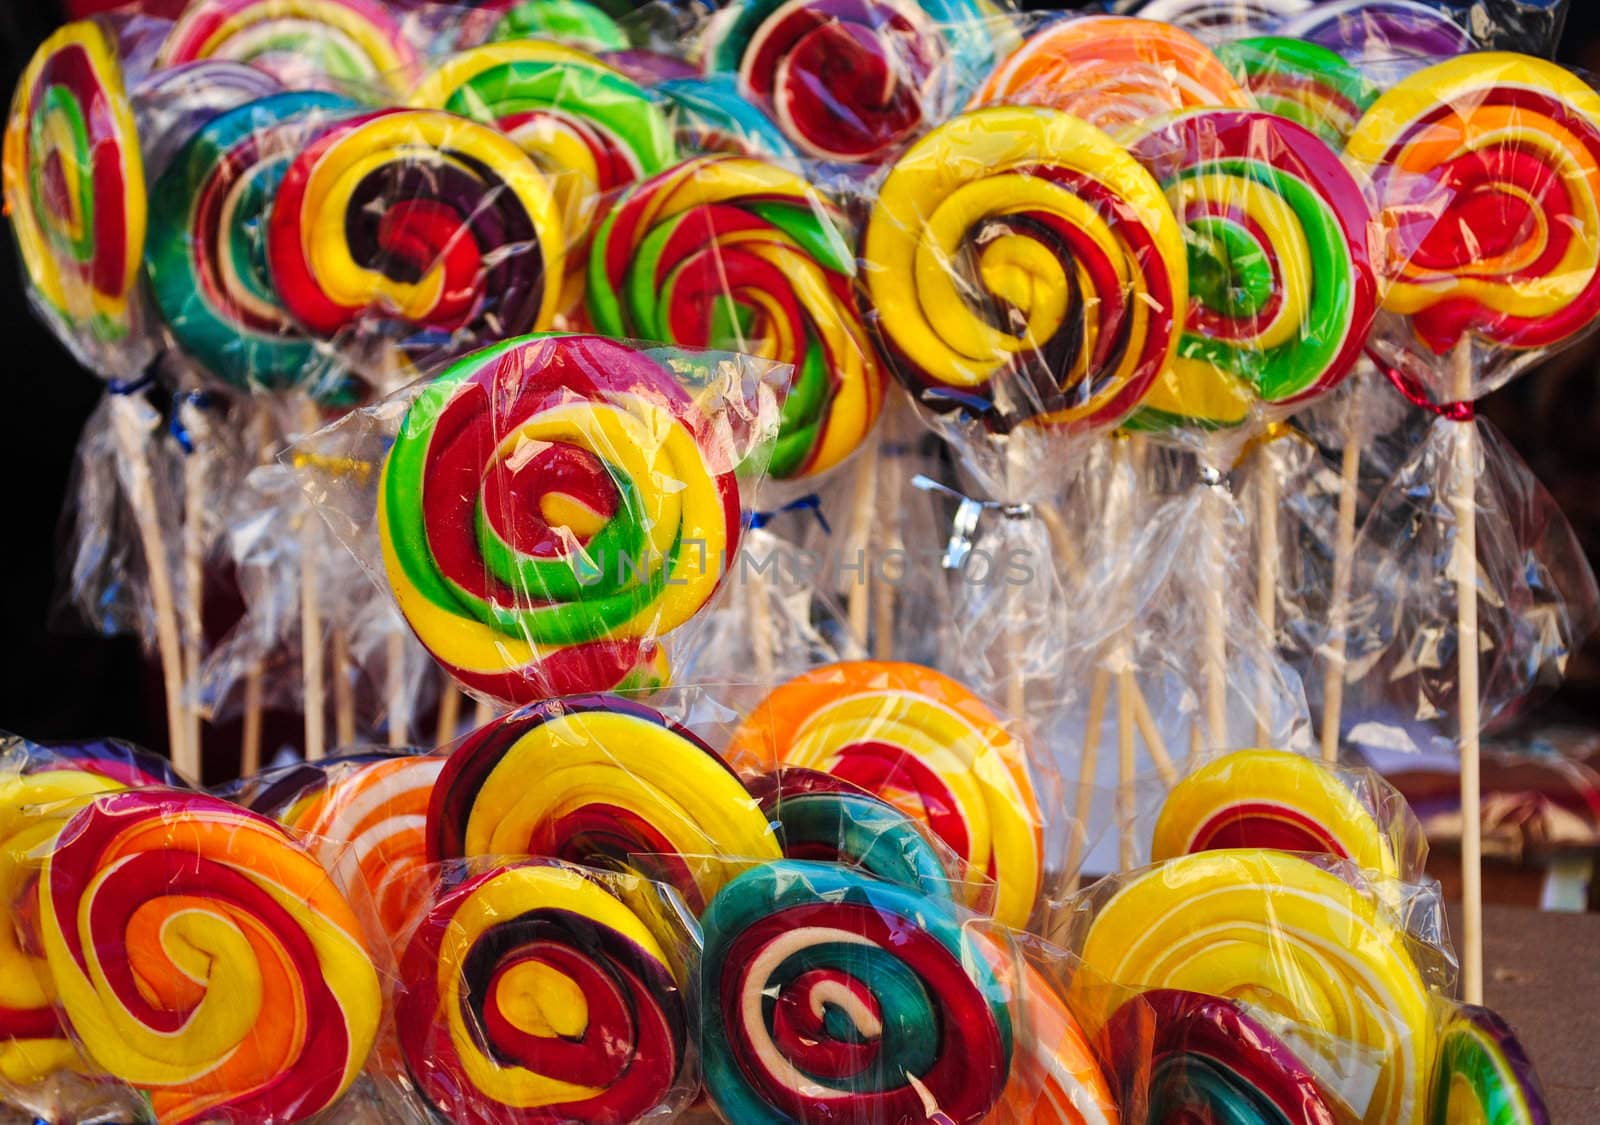 Colourfull lollipops by robertblaga